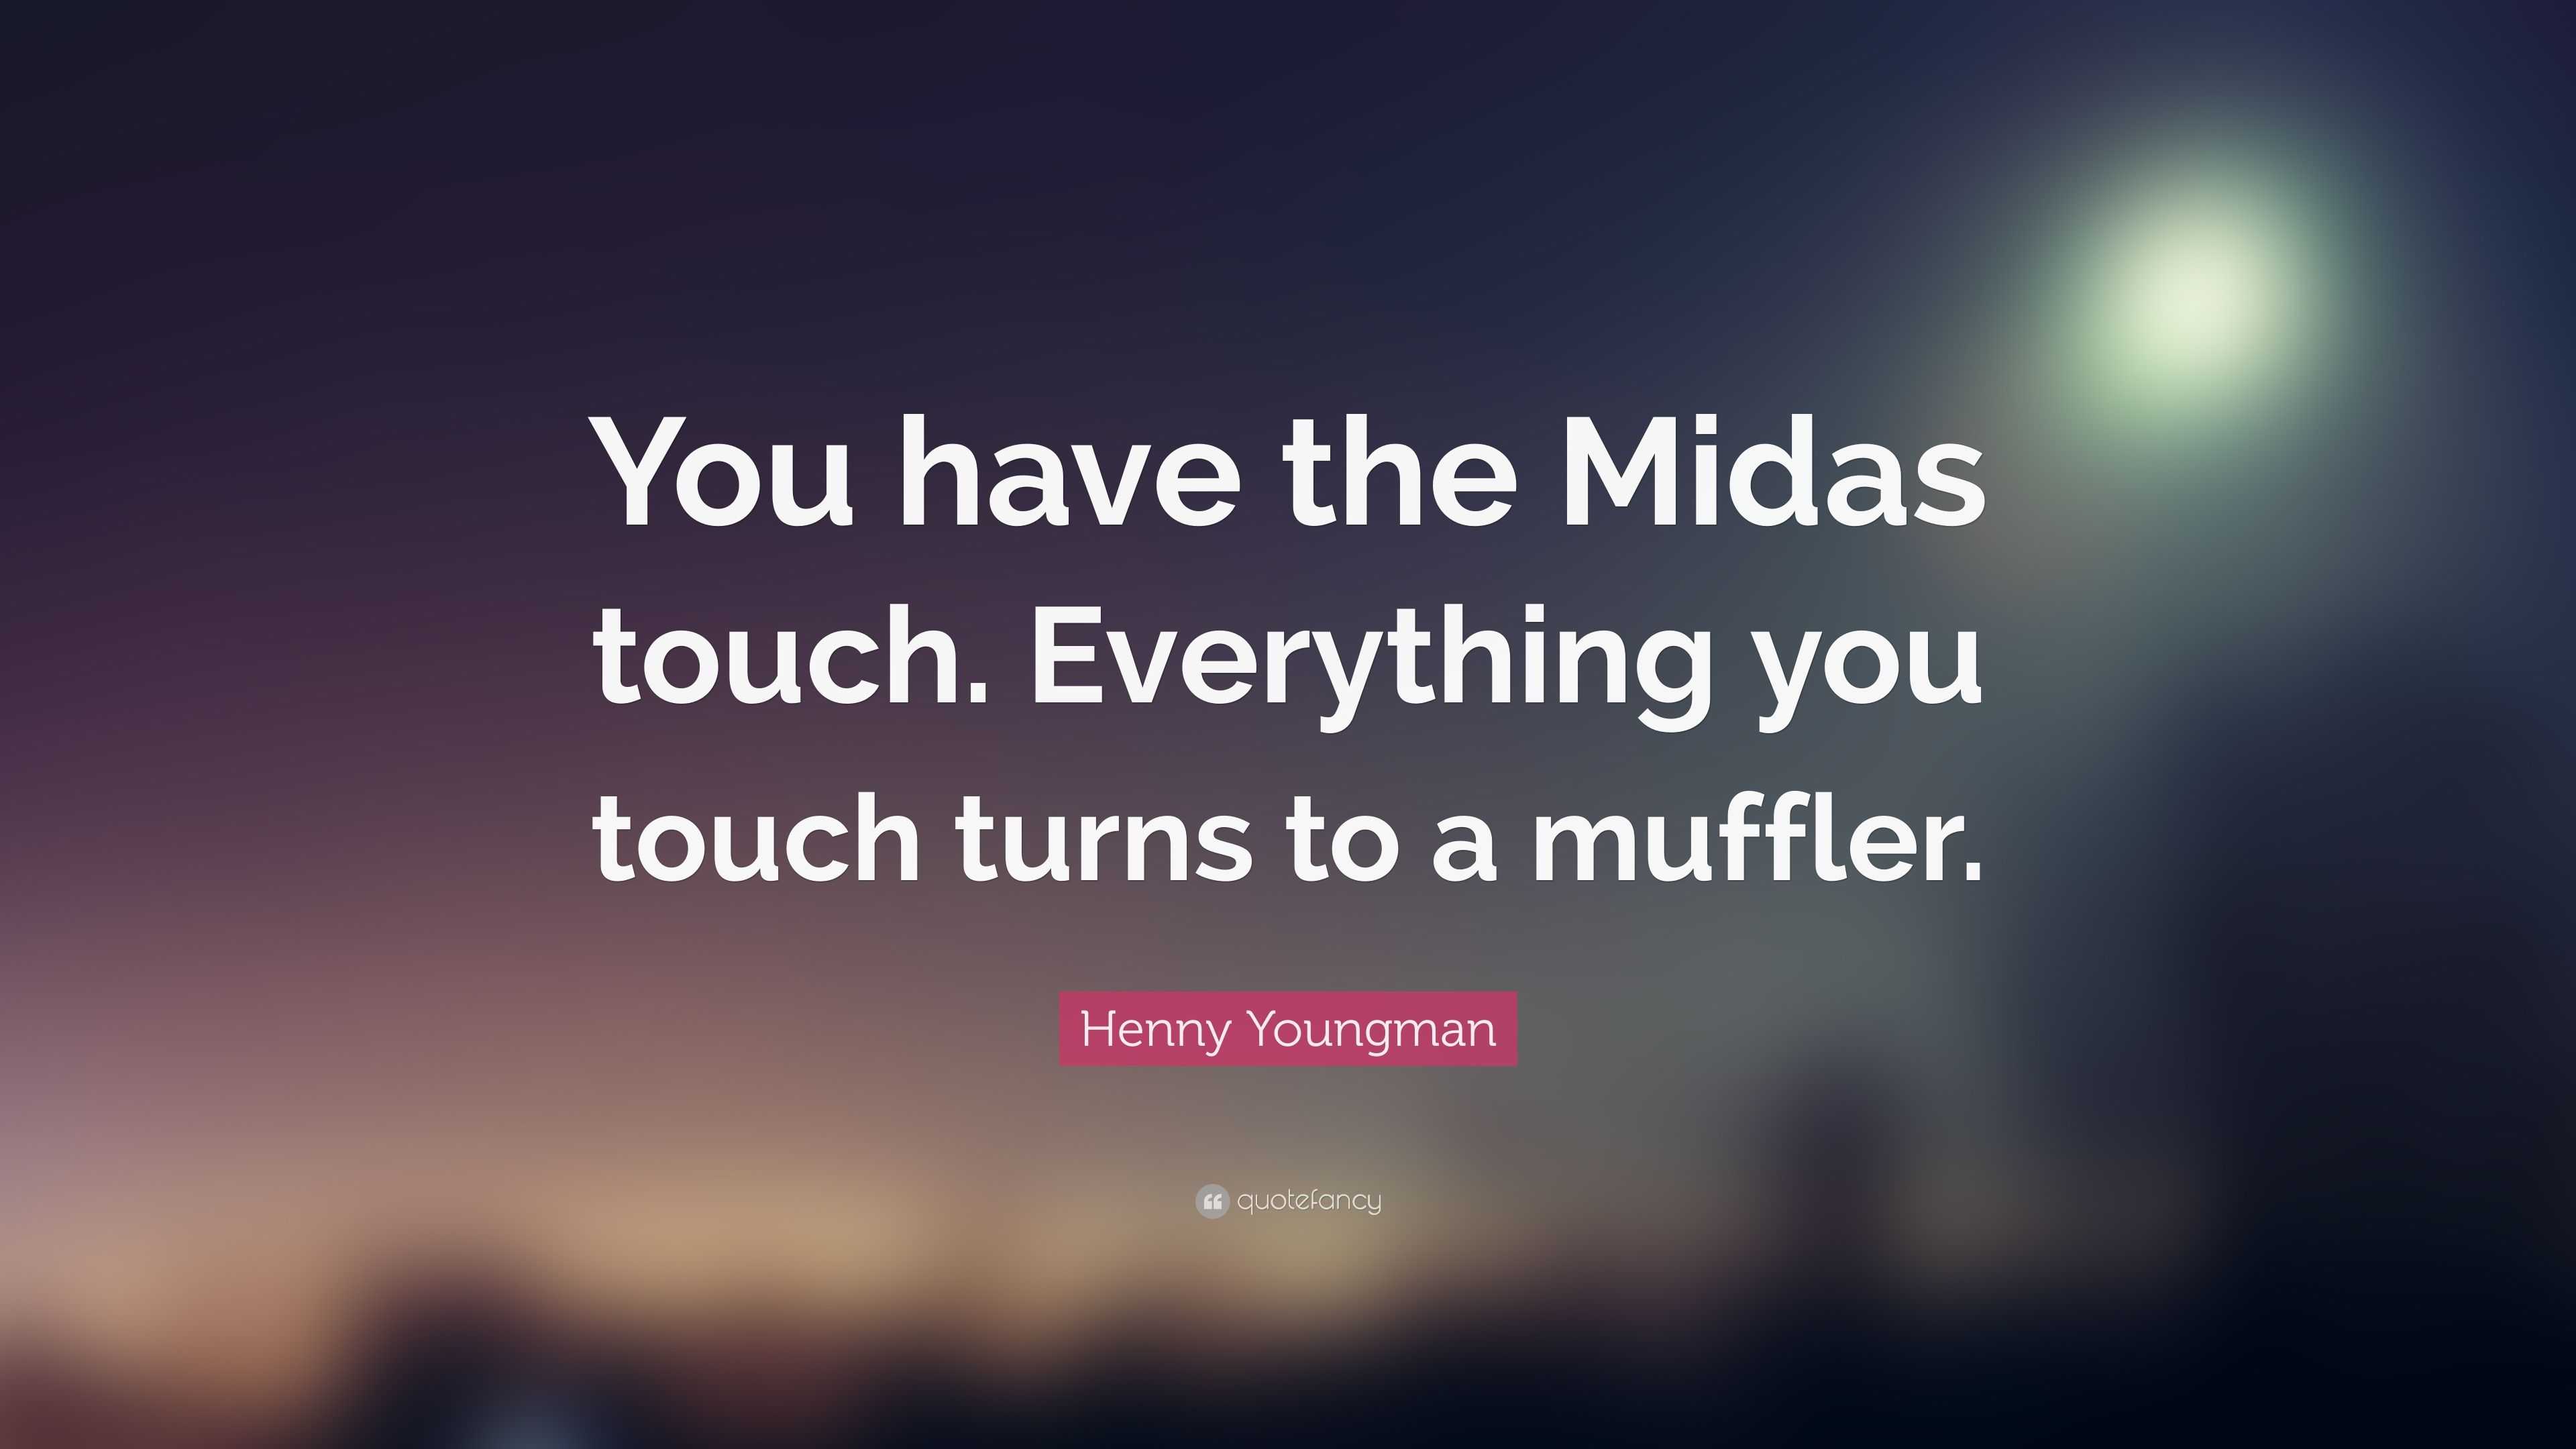 Henny Youngman Quote: “You have the Midas touch. Everything you touch turns  to a muffler.”